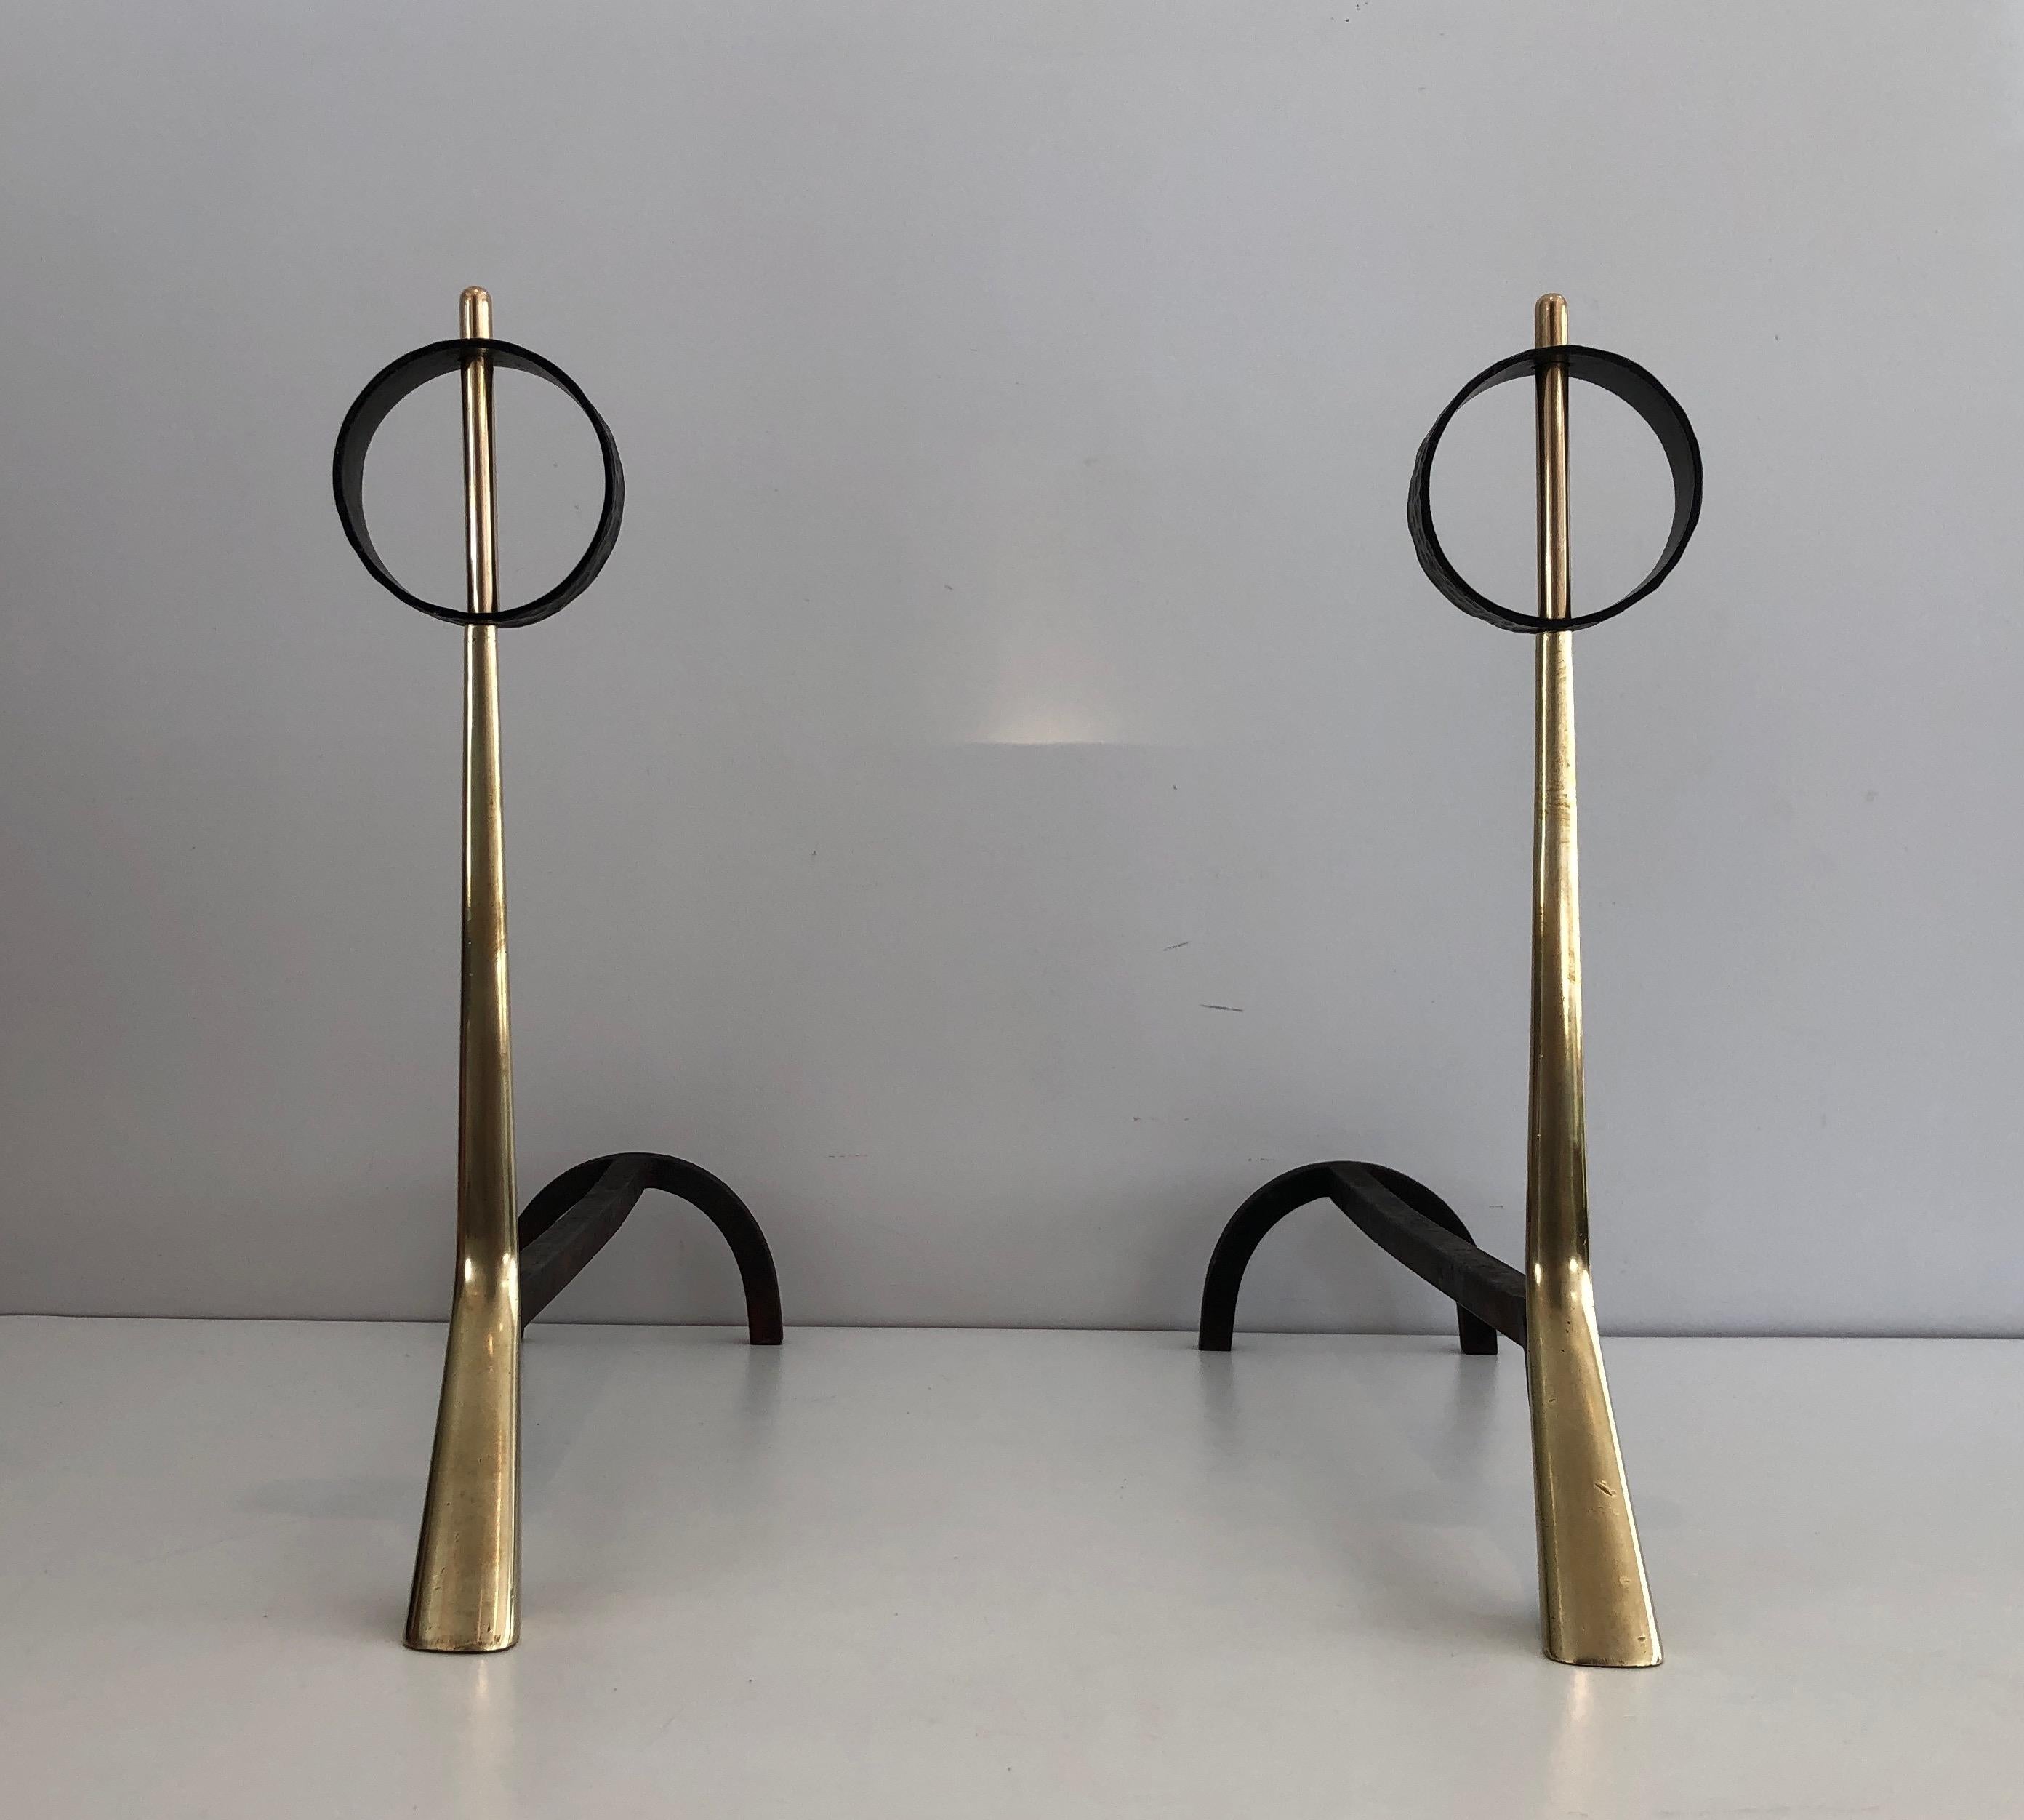 Pair of Modernist Bronze and Wrought Iron Andirons, Italian, circa 1950 For Sale 7